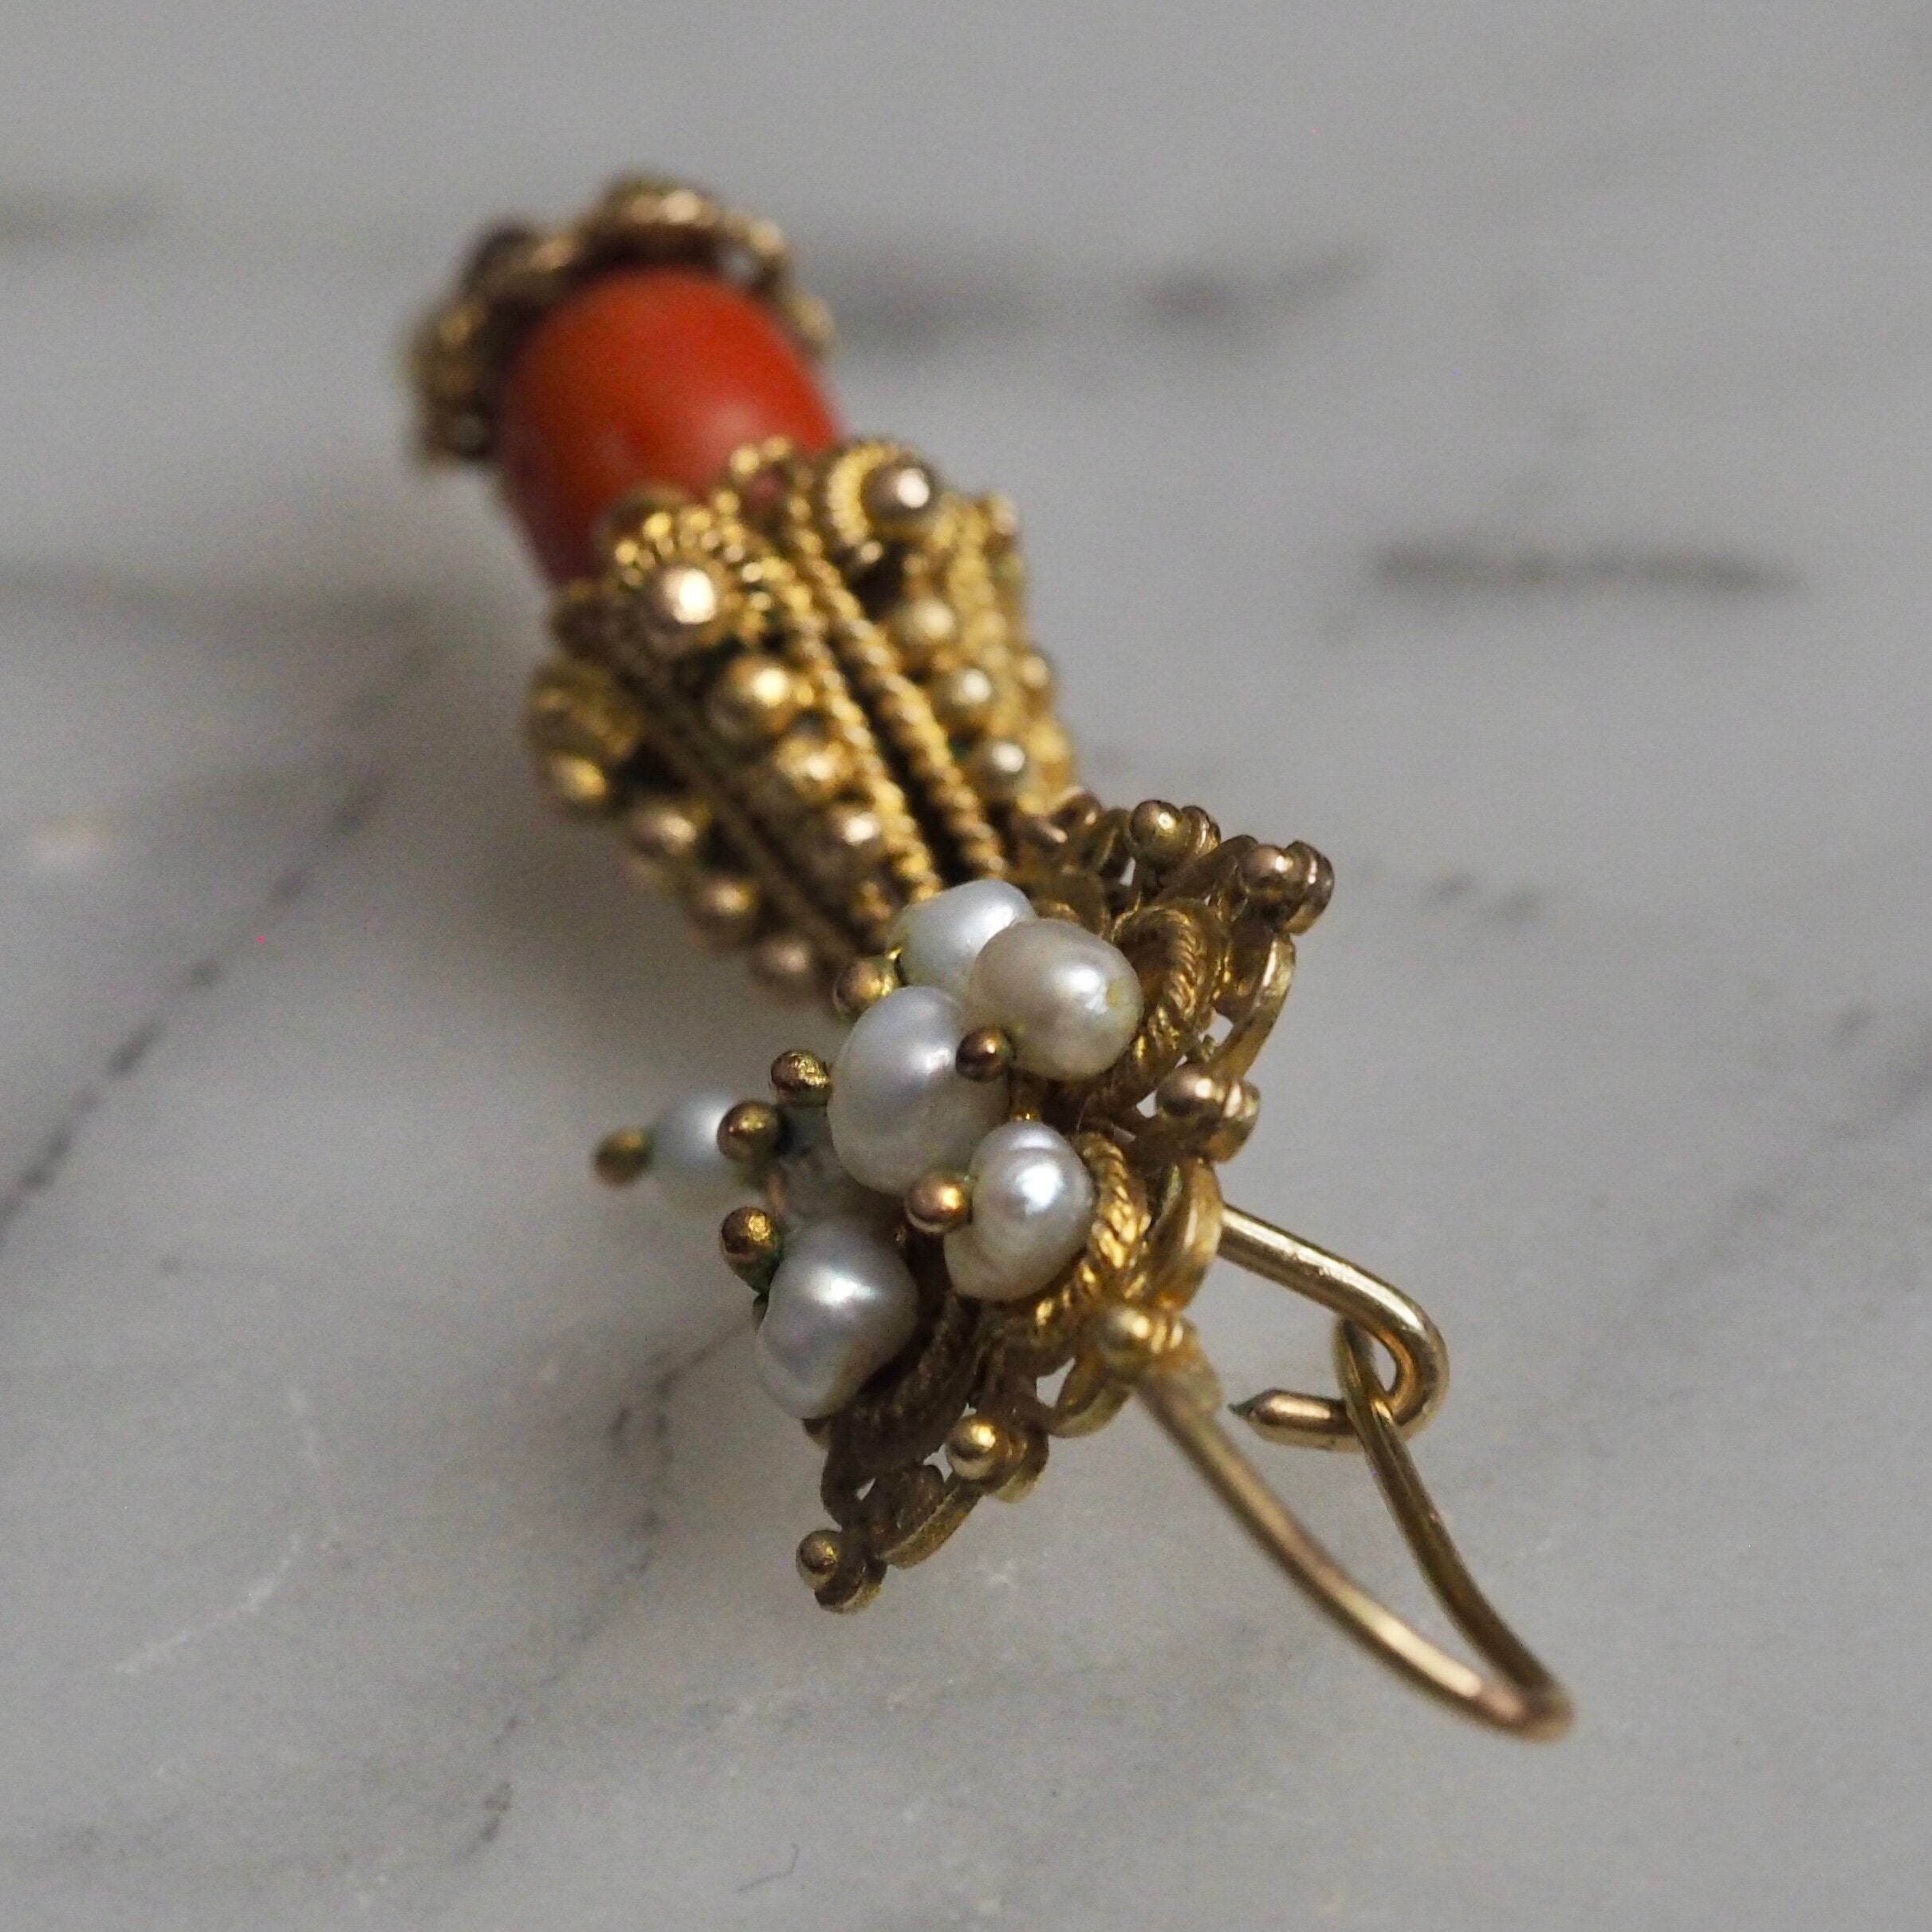 Antique Rare Mexican 10k Gold Cannetille Coral and Pearl Earrings from Oaxaca